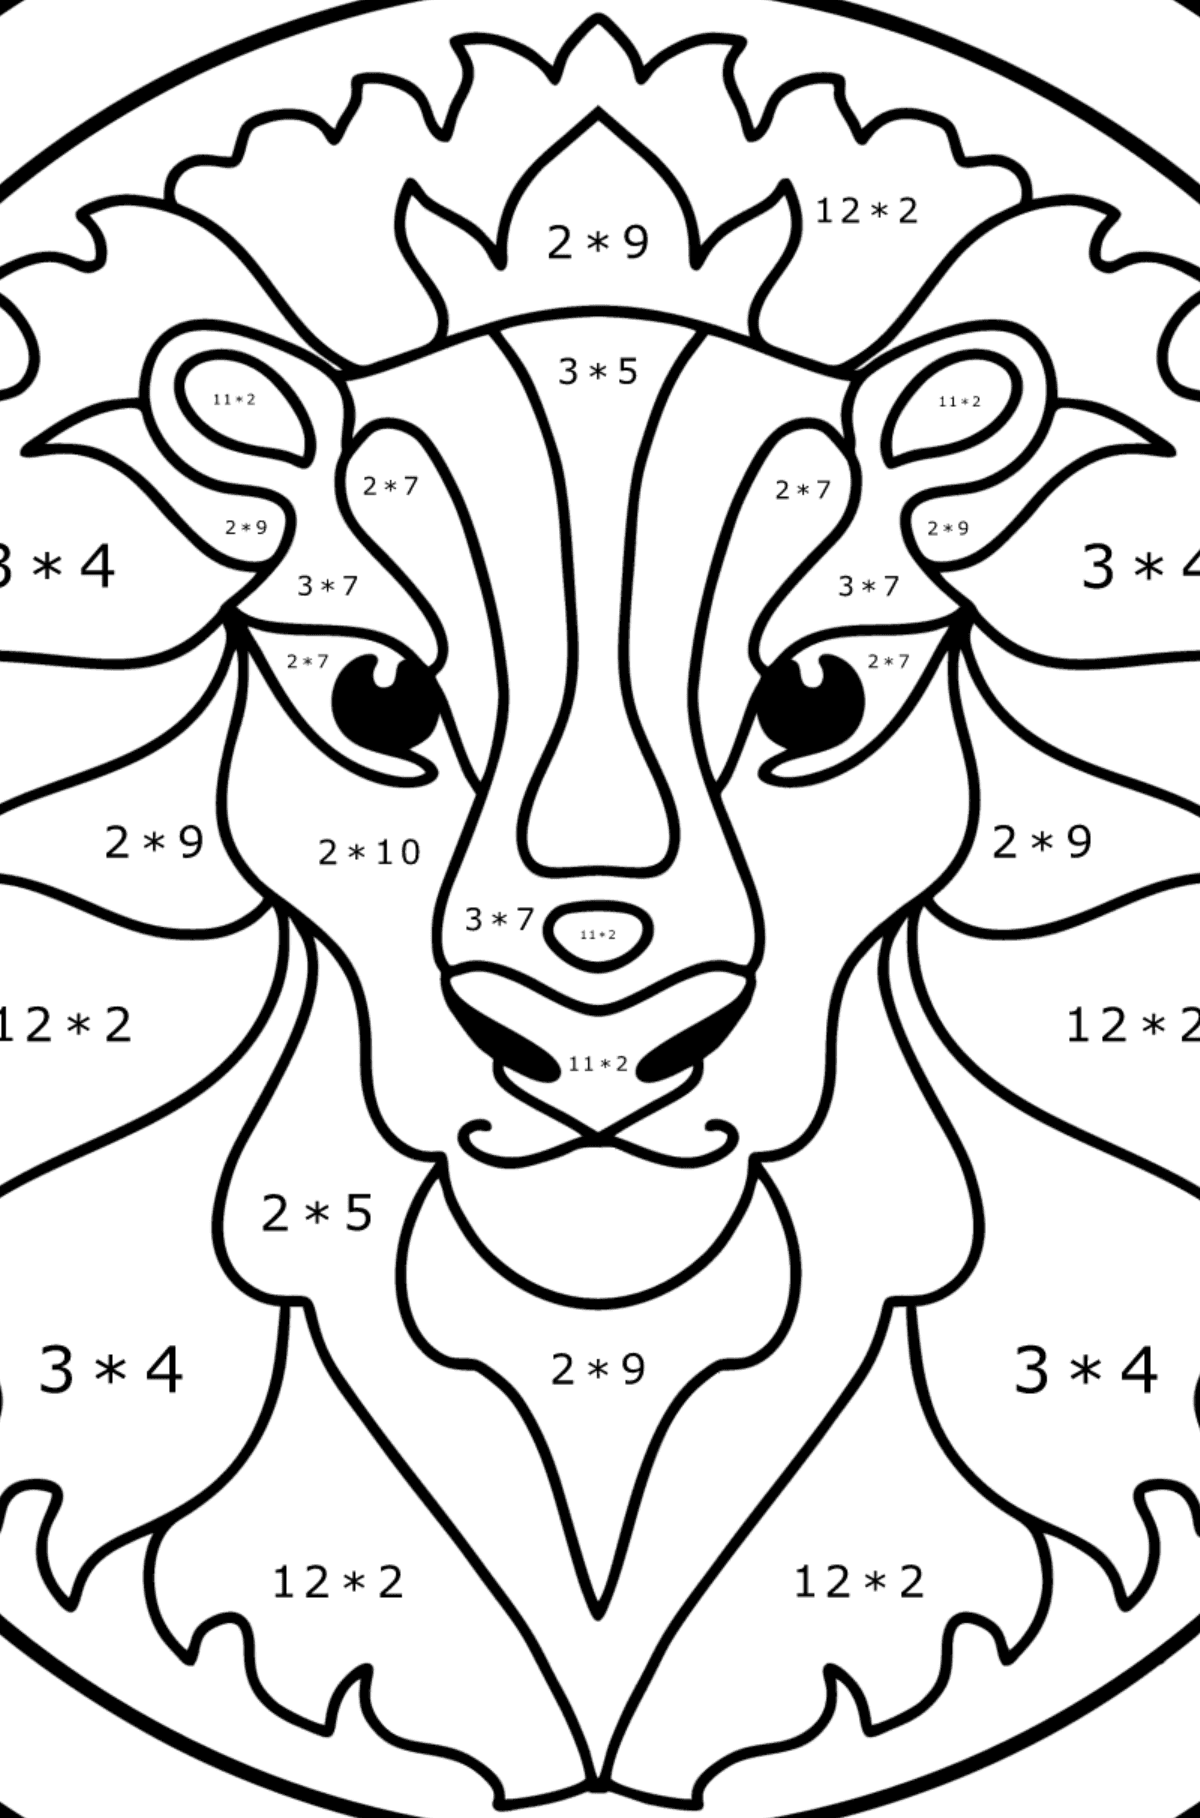 Coloring page for kids - zodiac sign Leo - Math Coloring - Multiplication for Kids